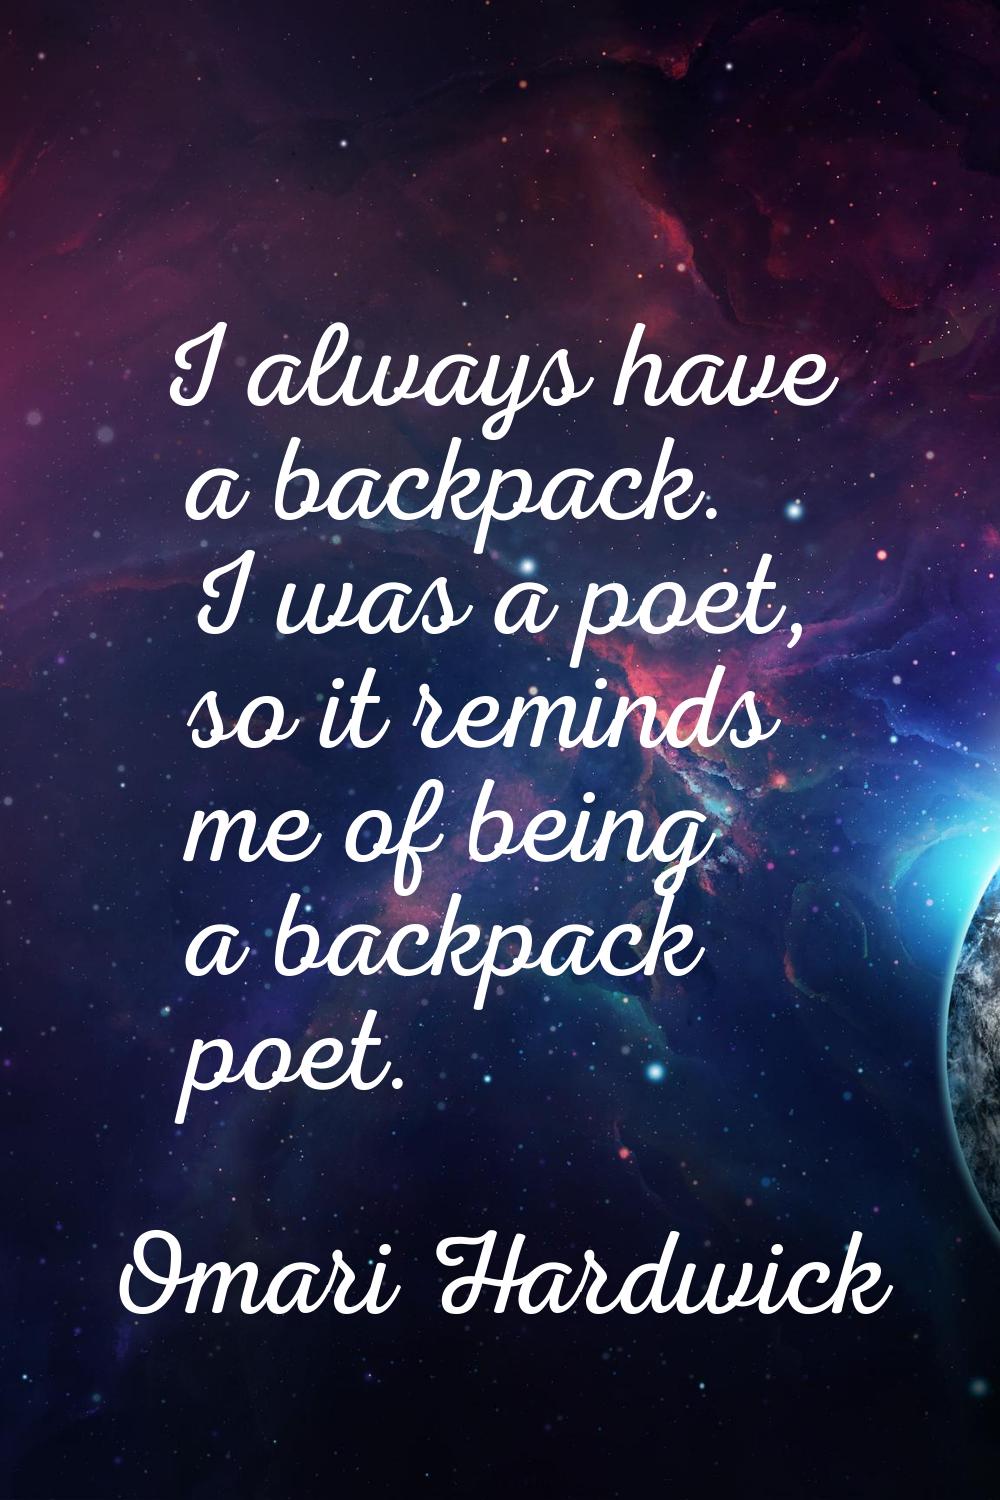 I always have a backpack. I was a poet, so it reminds me of being a backpack poet.